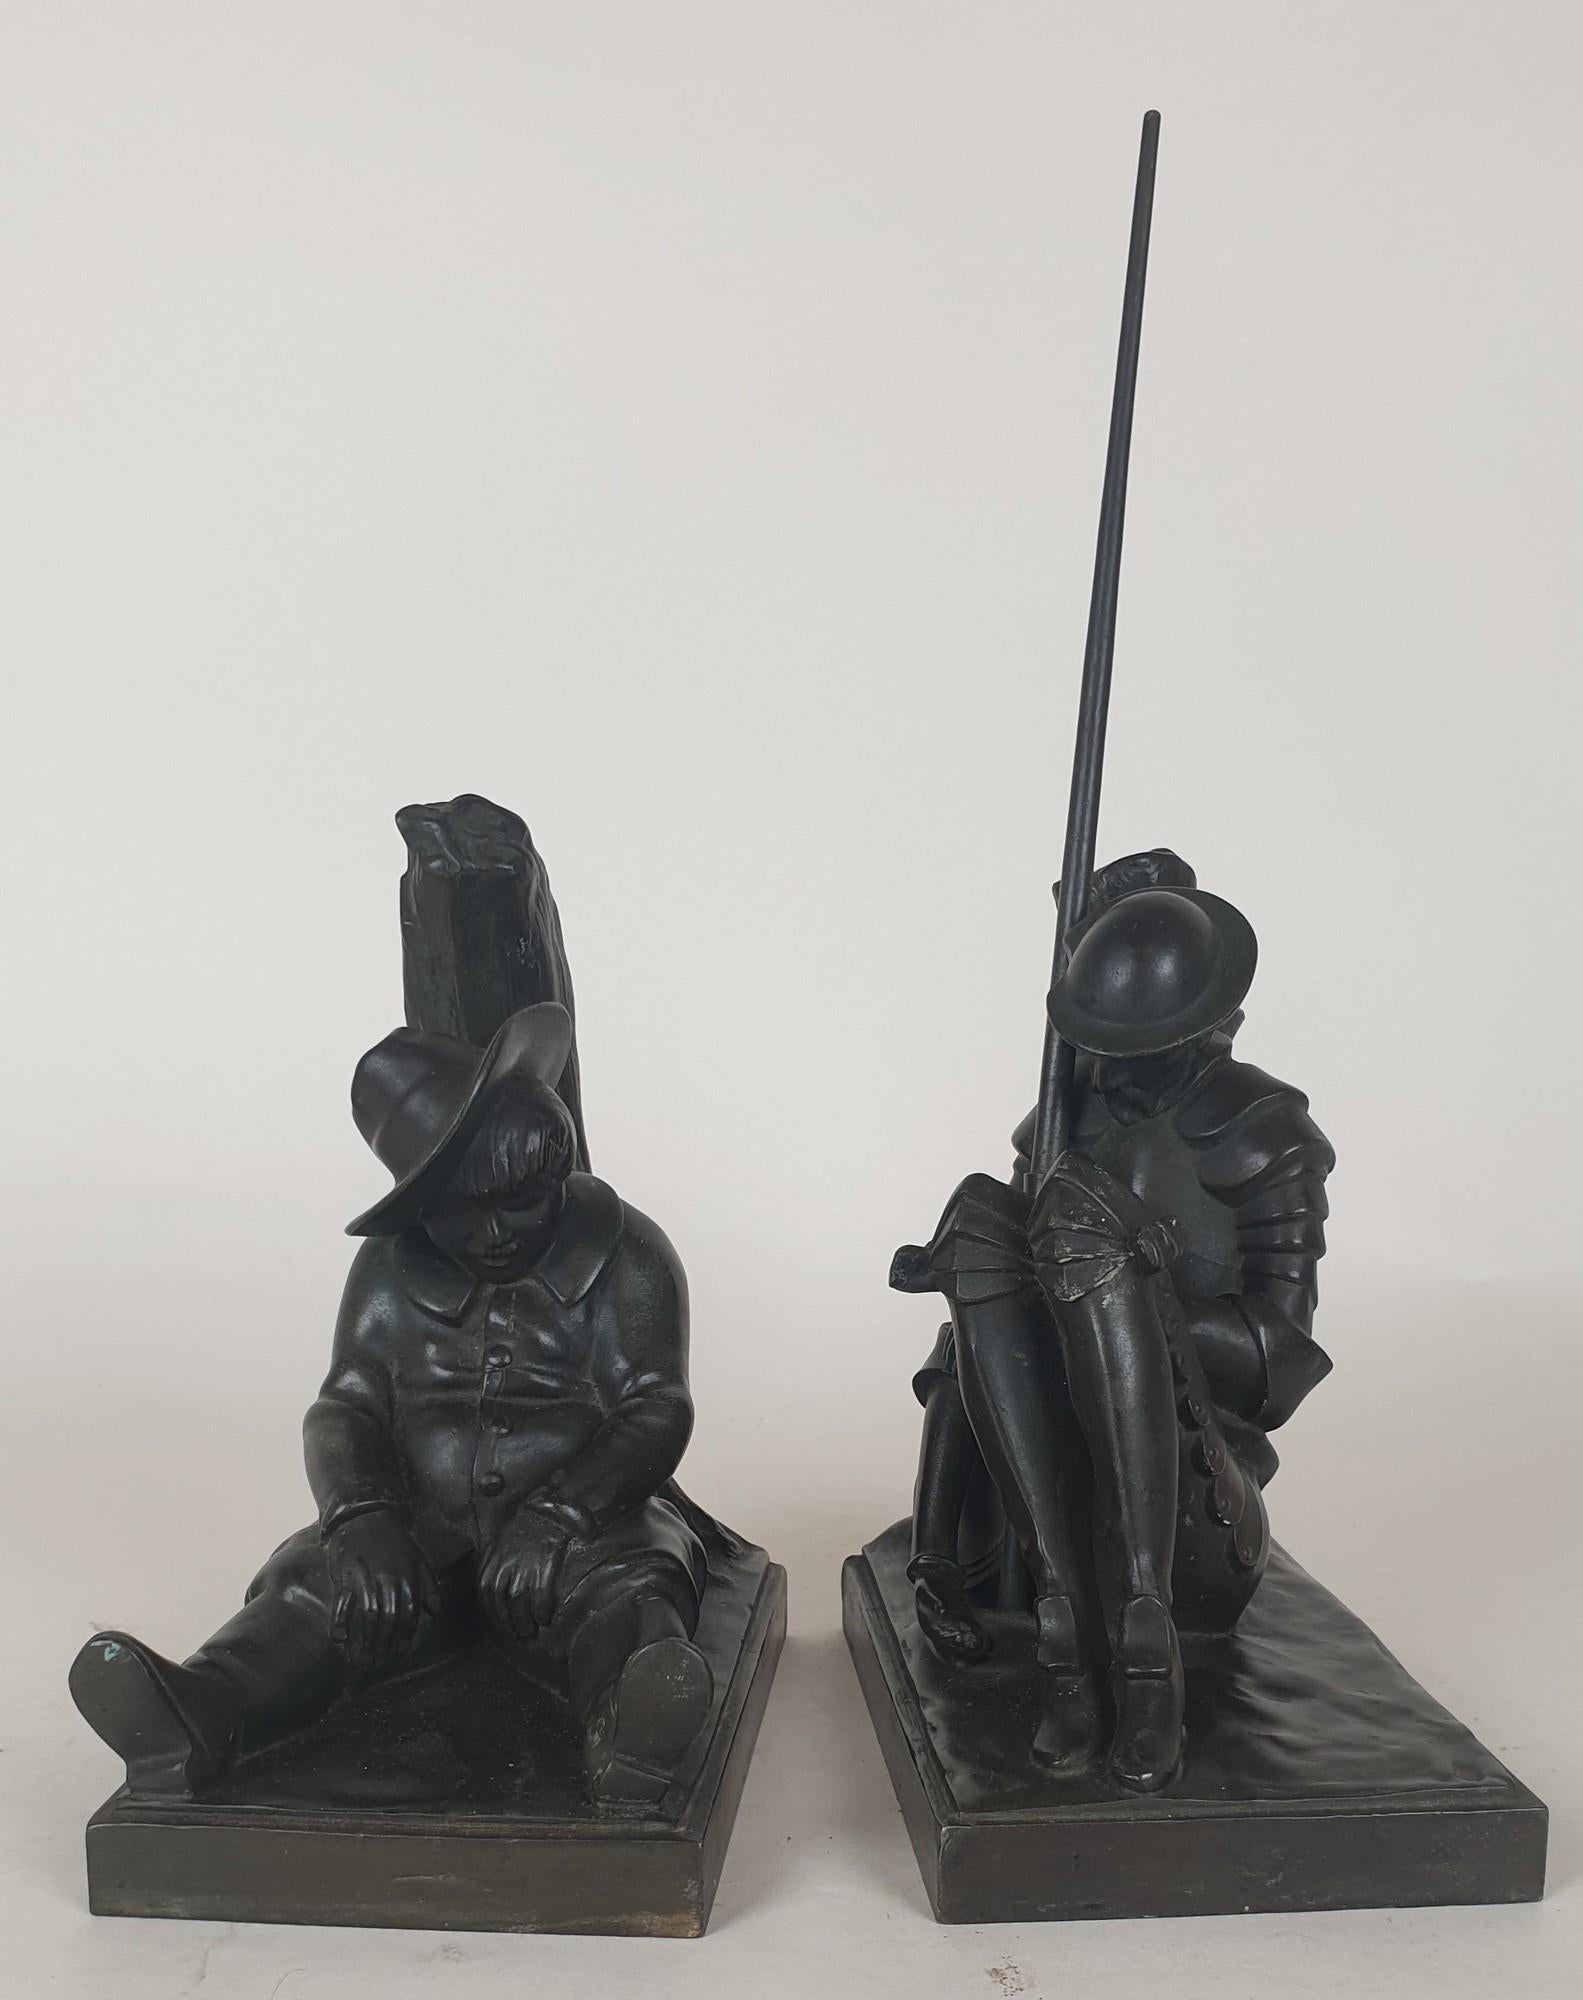 Pair of bookends representing the hero of Spanish literature Don Quixote and his faithful Sancho Panza: both are seated, asleep.

Brown patina metal sculptures (spelter), one of them is signed Janlé.They were published by Max Le Verrier.

Light